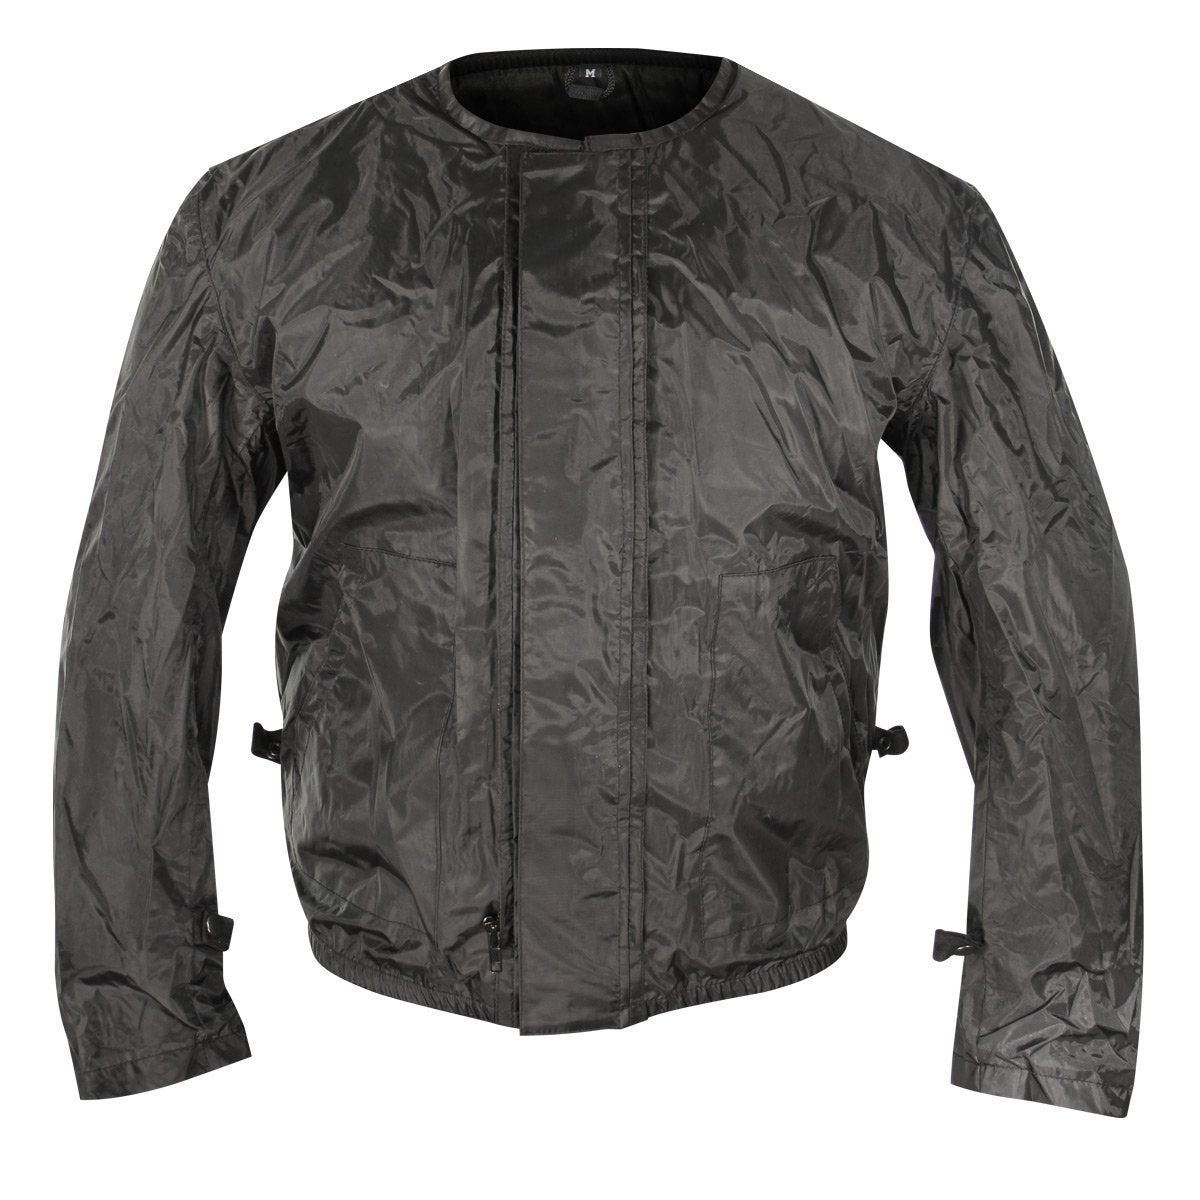 Xelement XS8161 Men's 'Venture' All Season Black with Red Tri-Tex and Mesh Jacket with X-Armor Protection